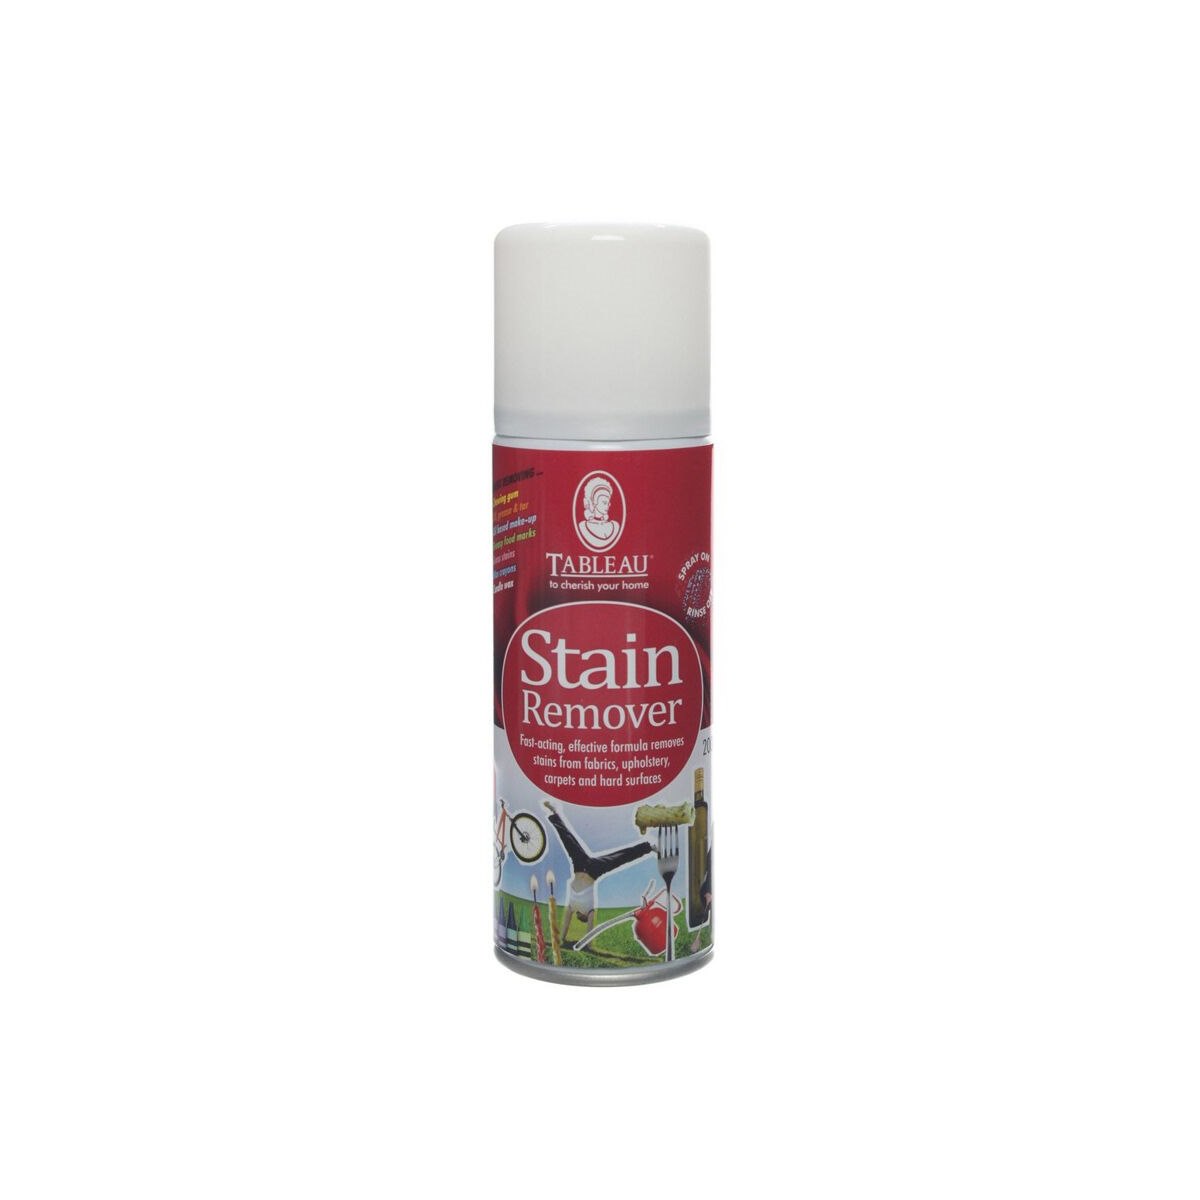 Tableau Stain Remover Spray 200ml